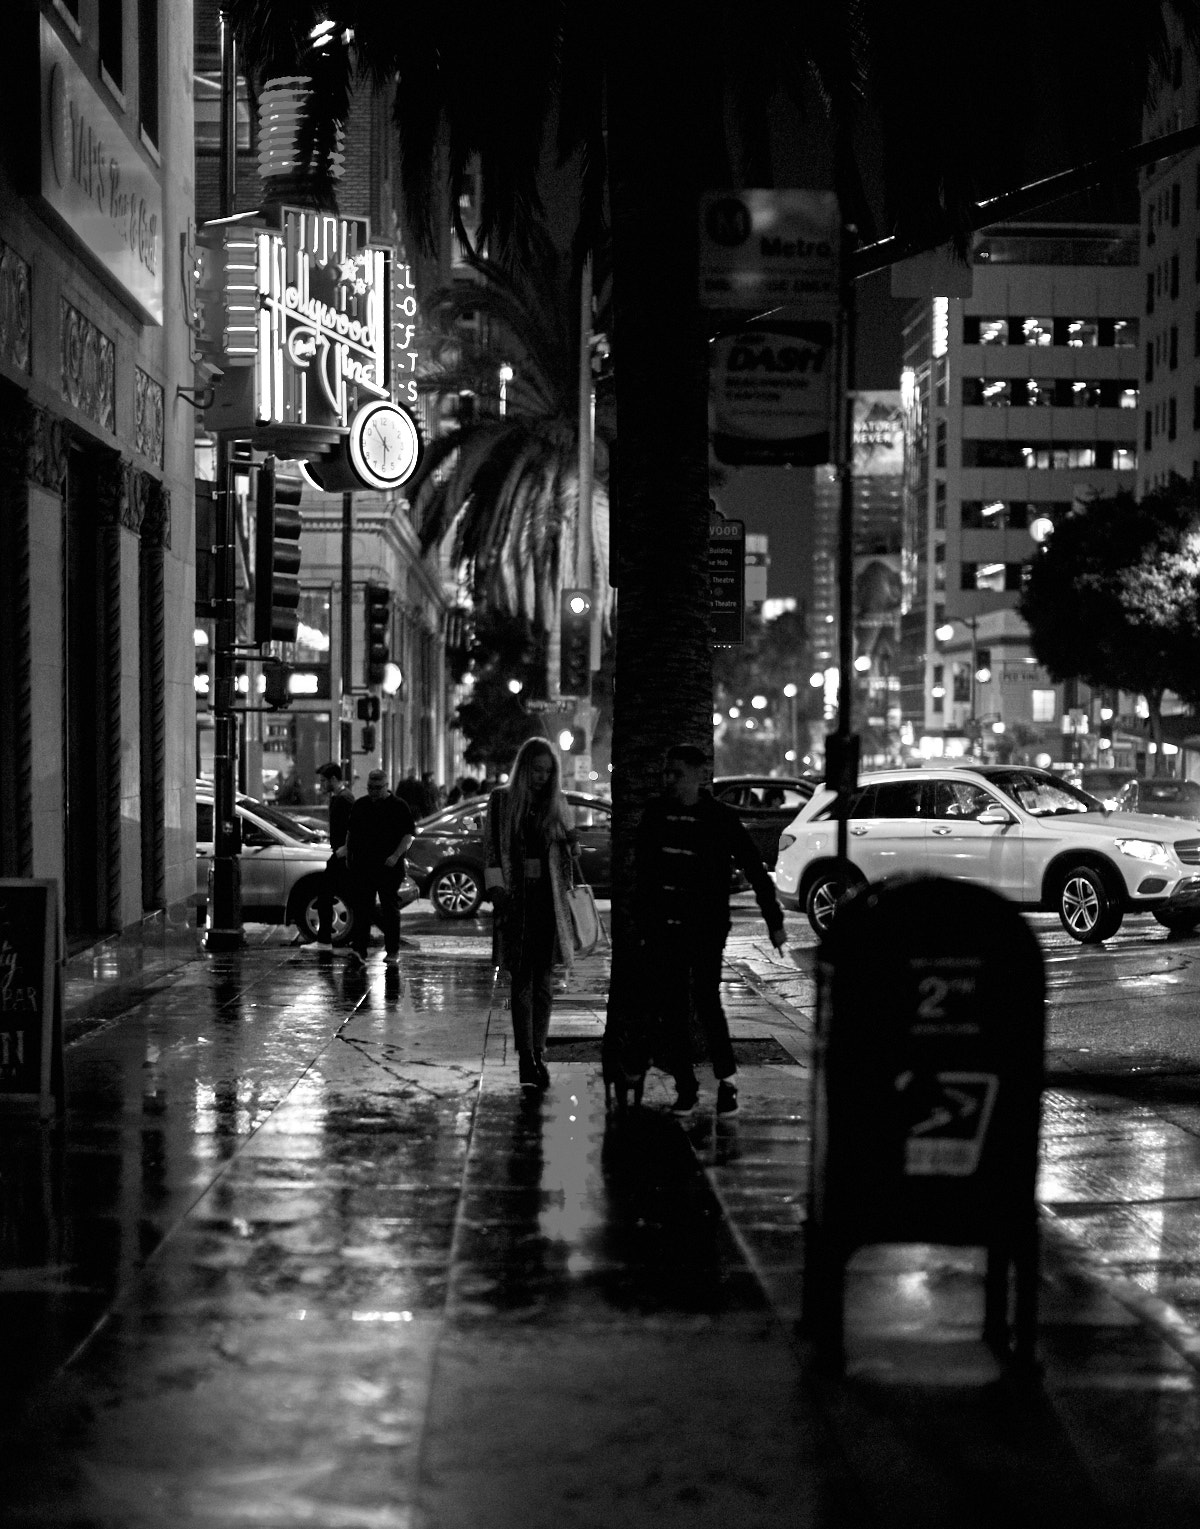 Los Angeles in the Rain. Leica M10-P with Leica 50mm Noctilux-M ASPH f/0.95. © Thorstren Overgaard. 